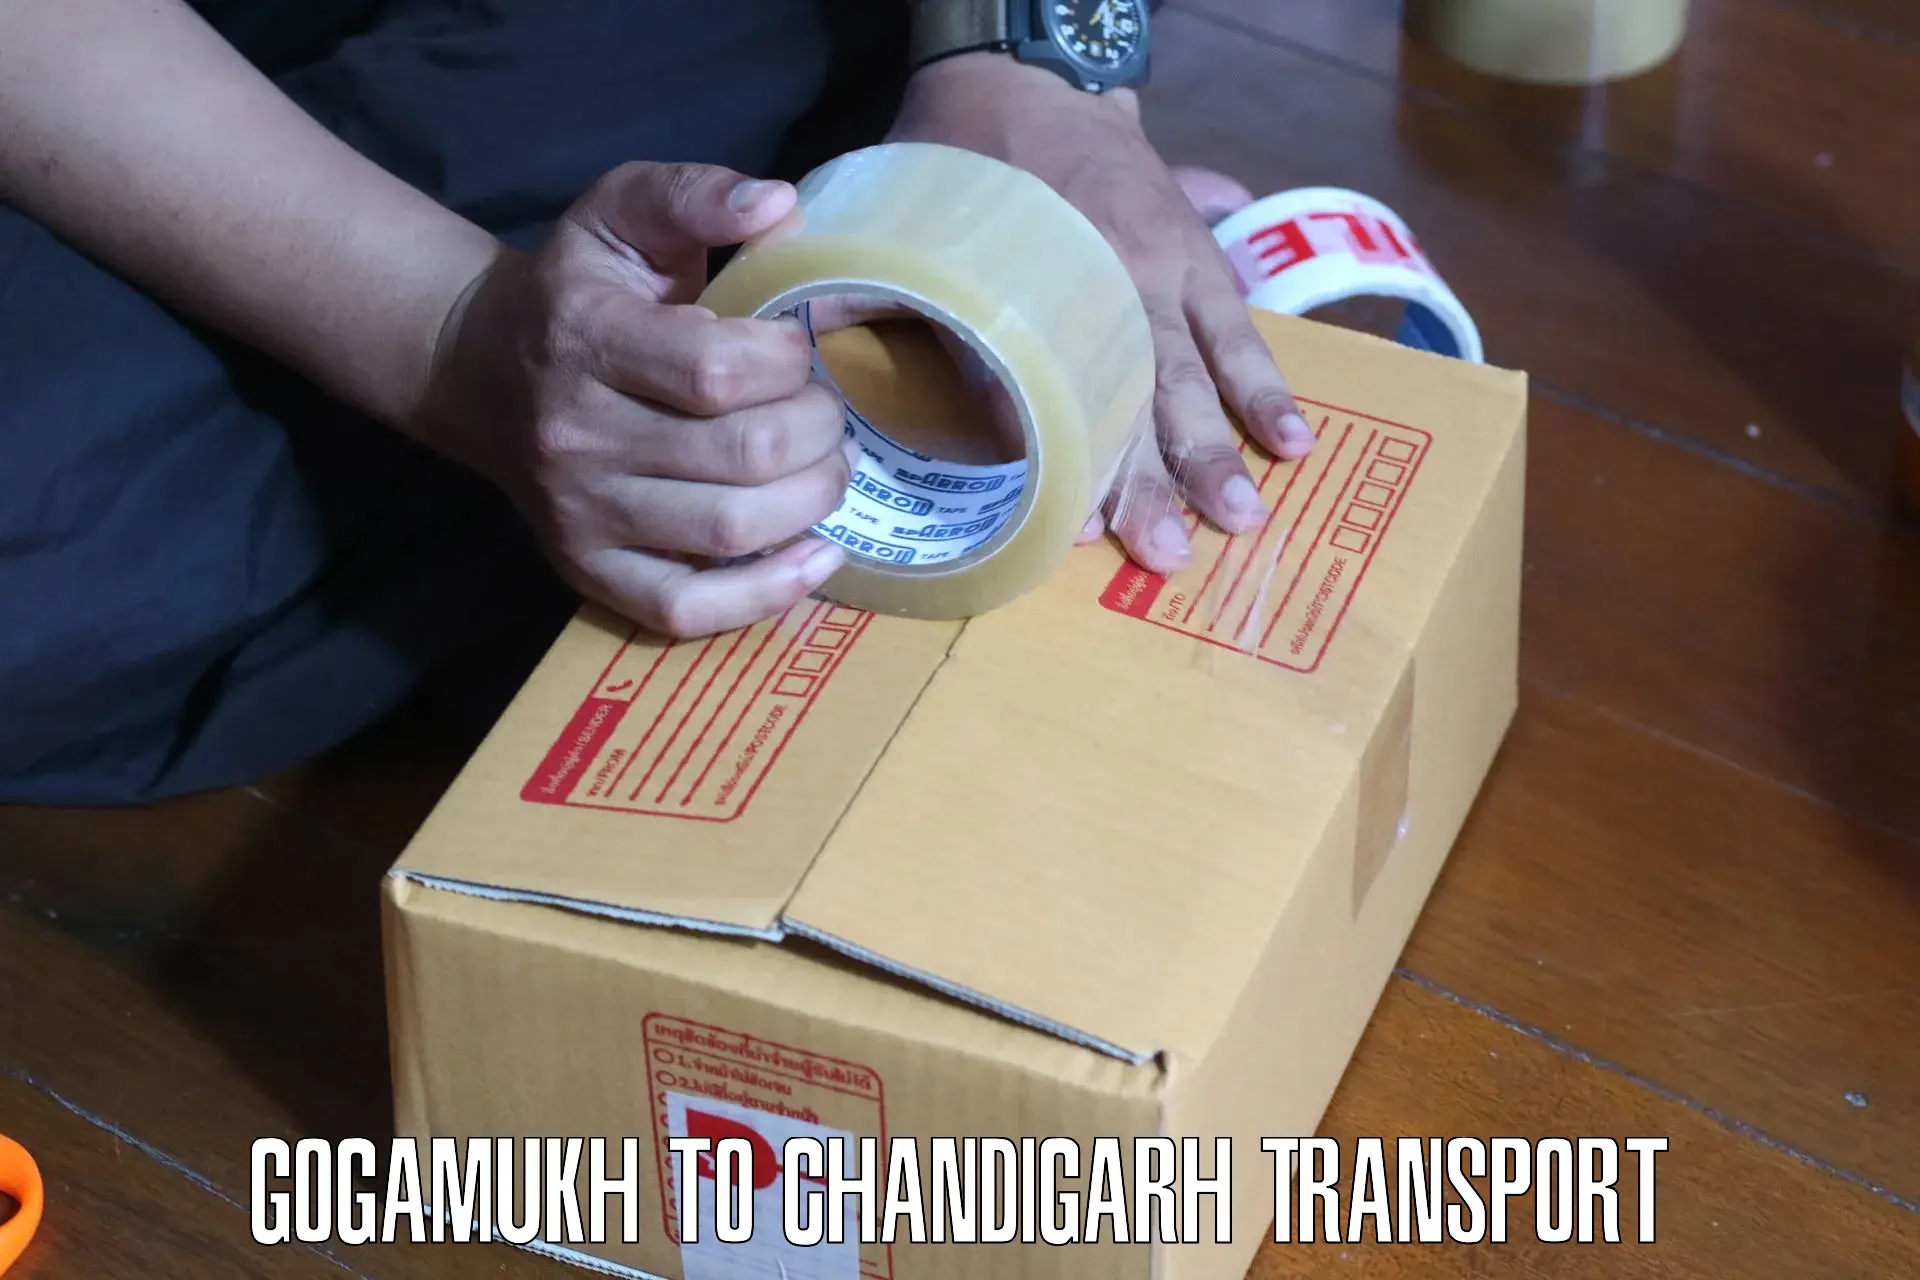 Container transportation services Gogamukh to Chandigarh